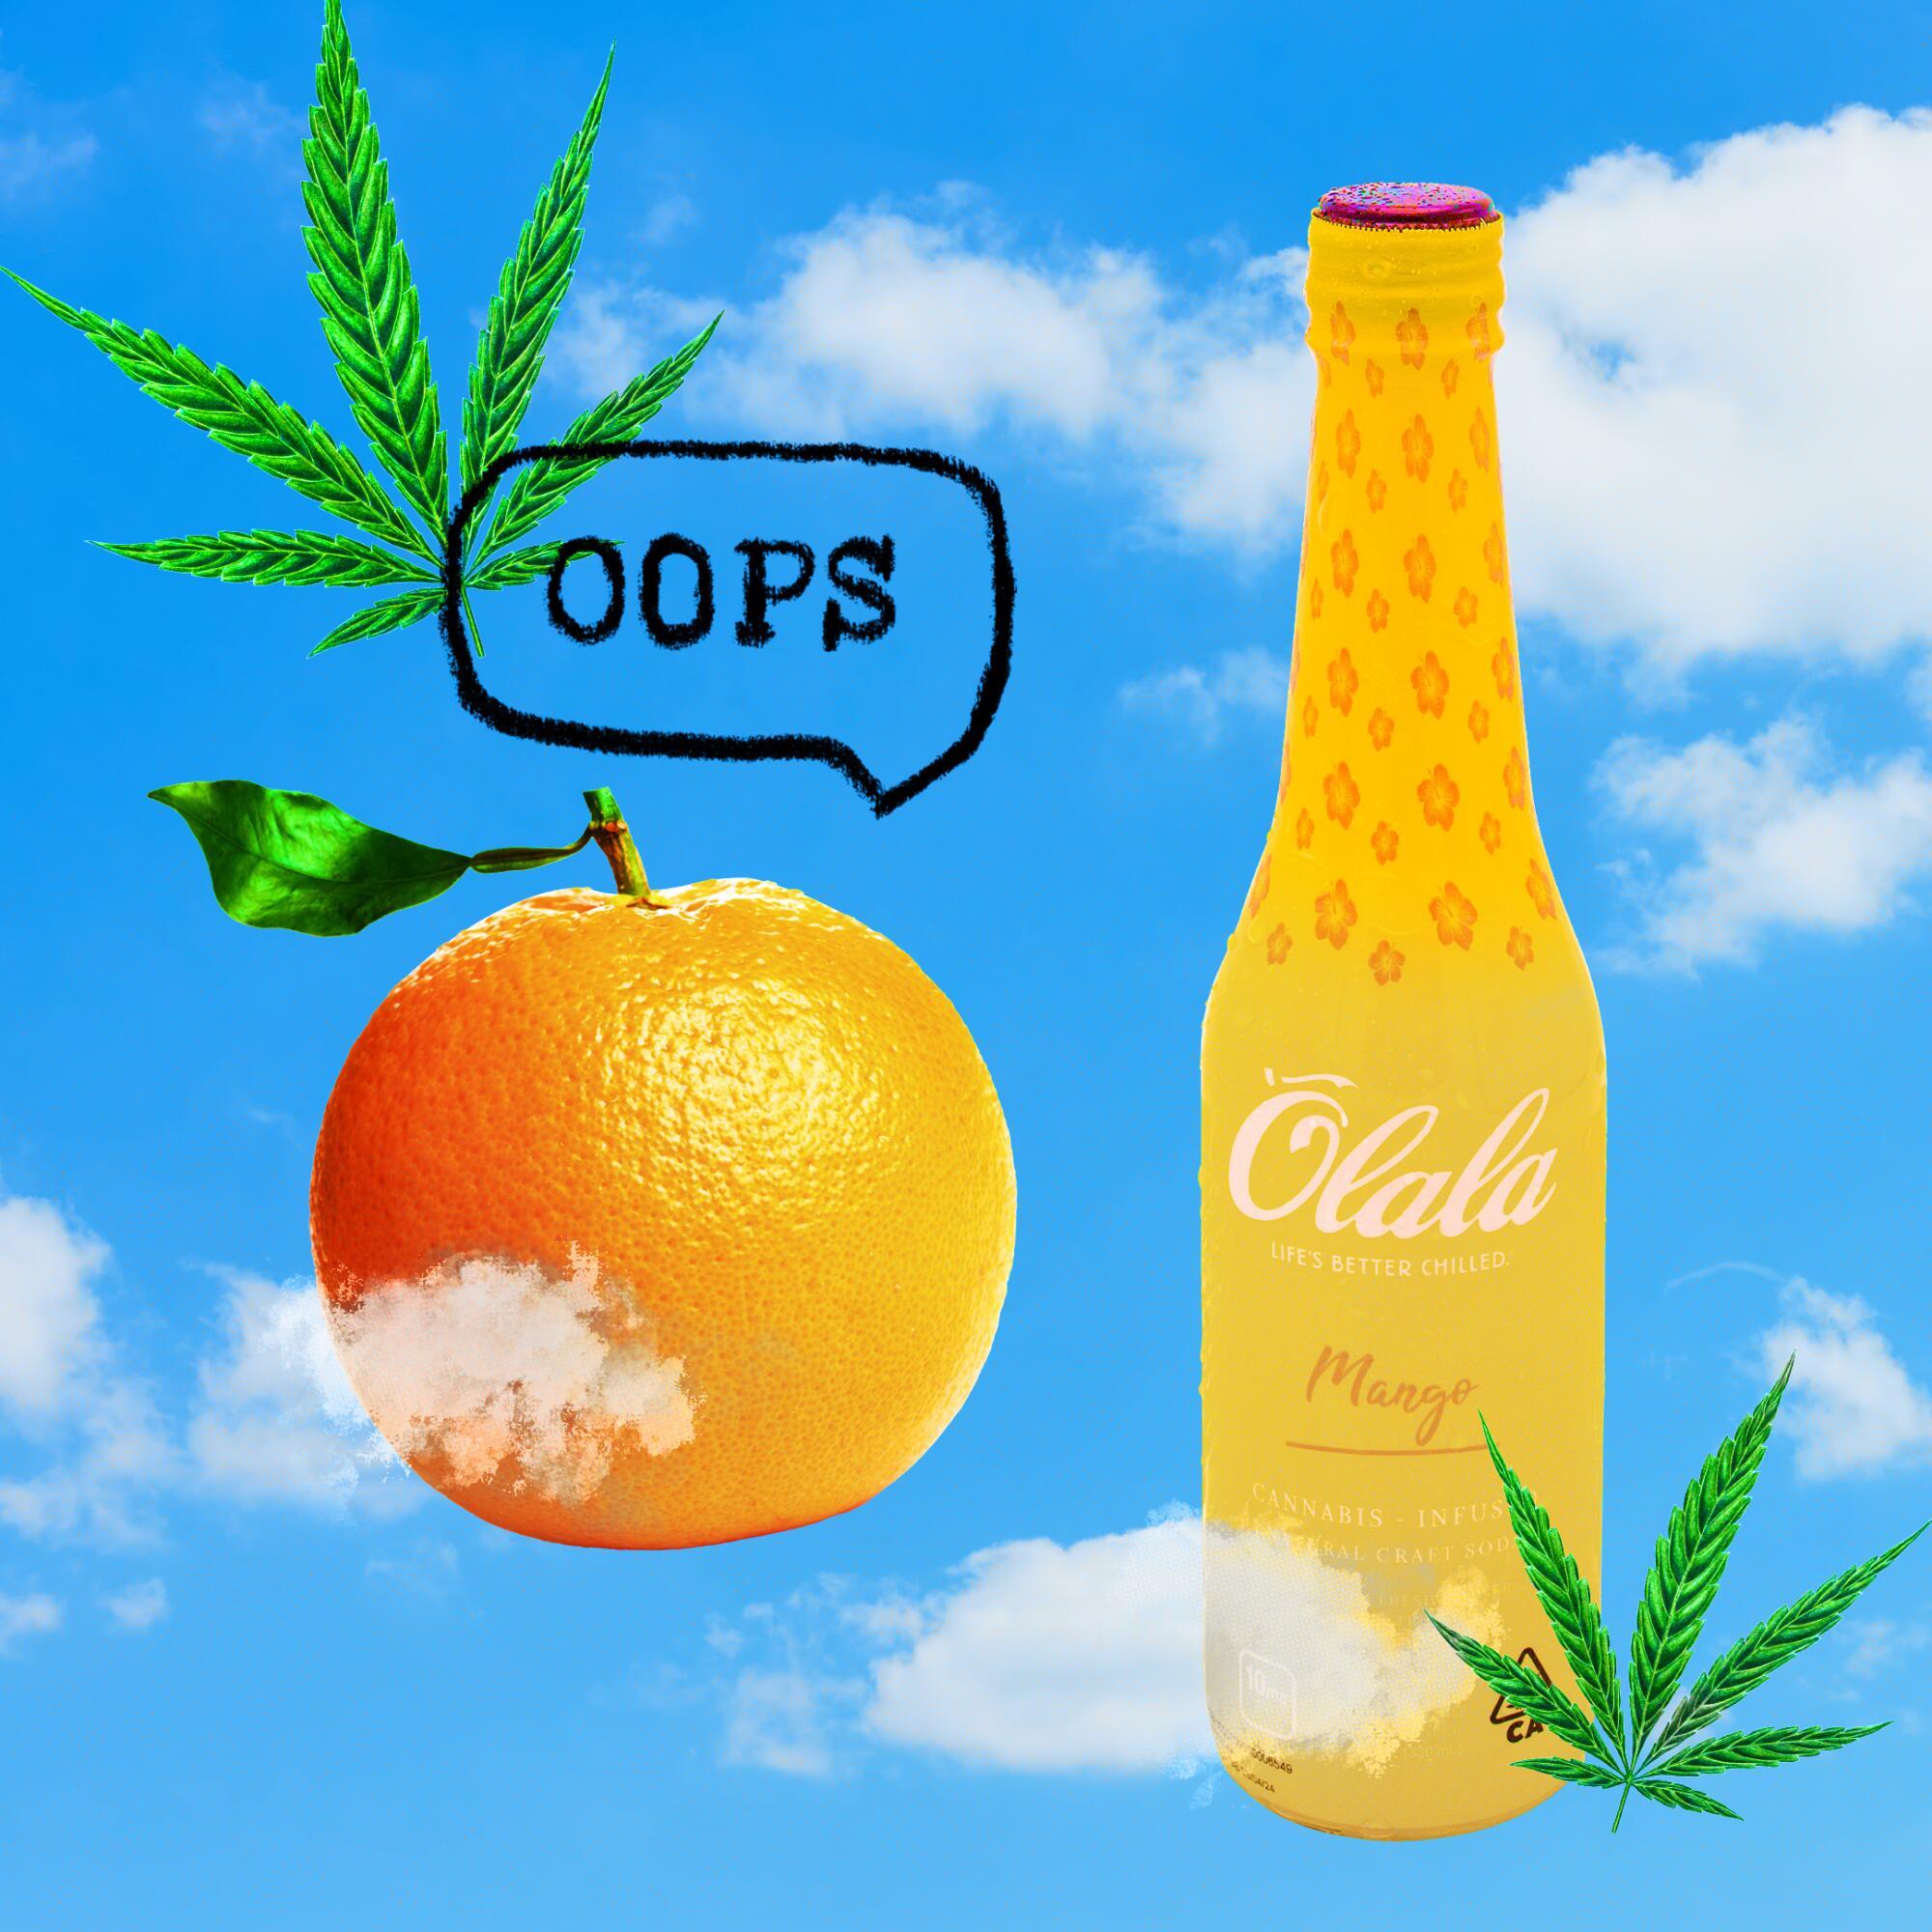 Olala Mango drink next to an illustrated orange and the word "oops."